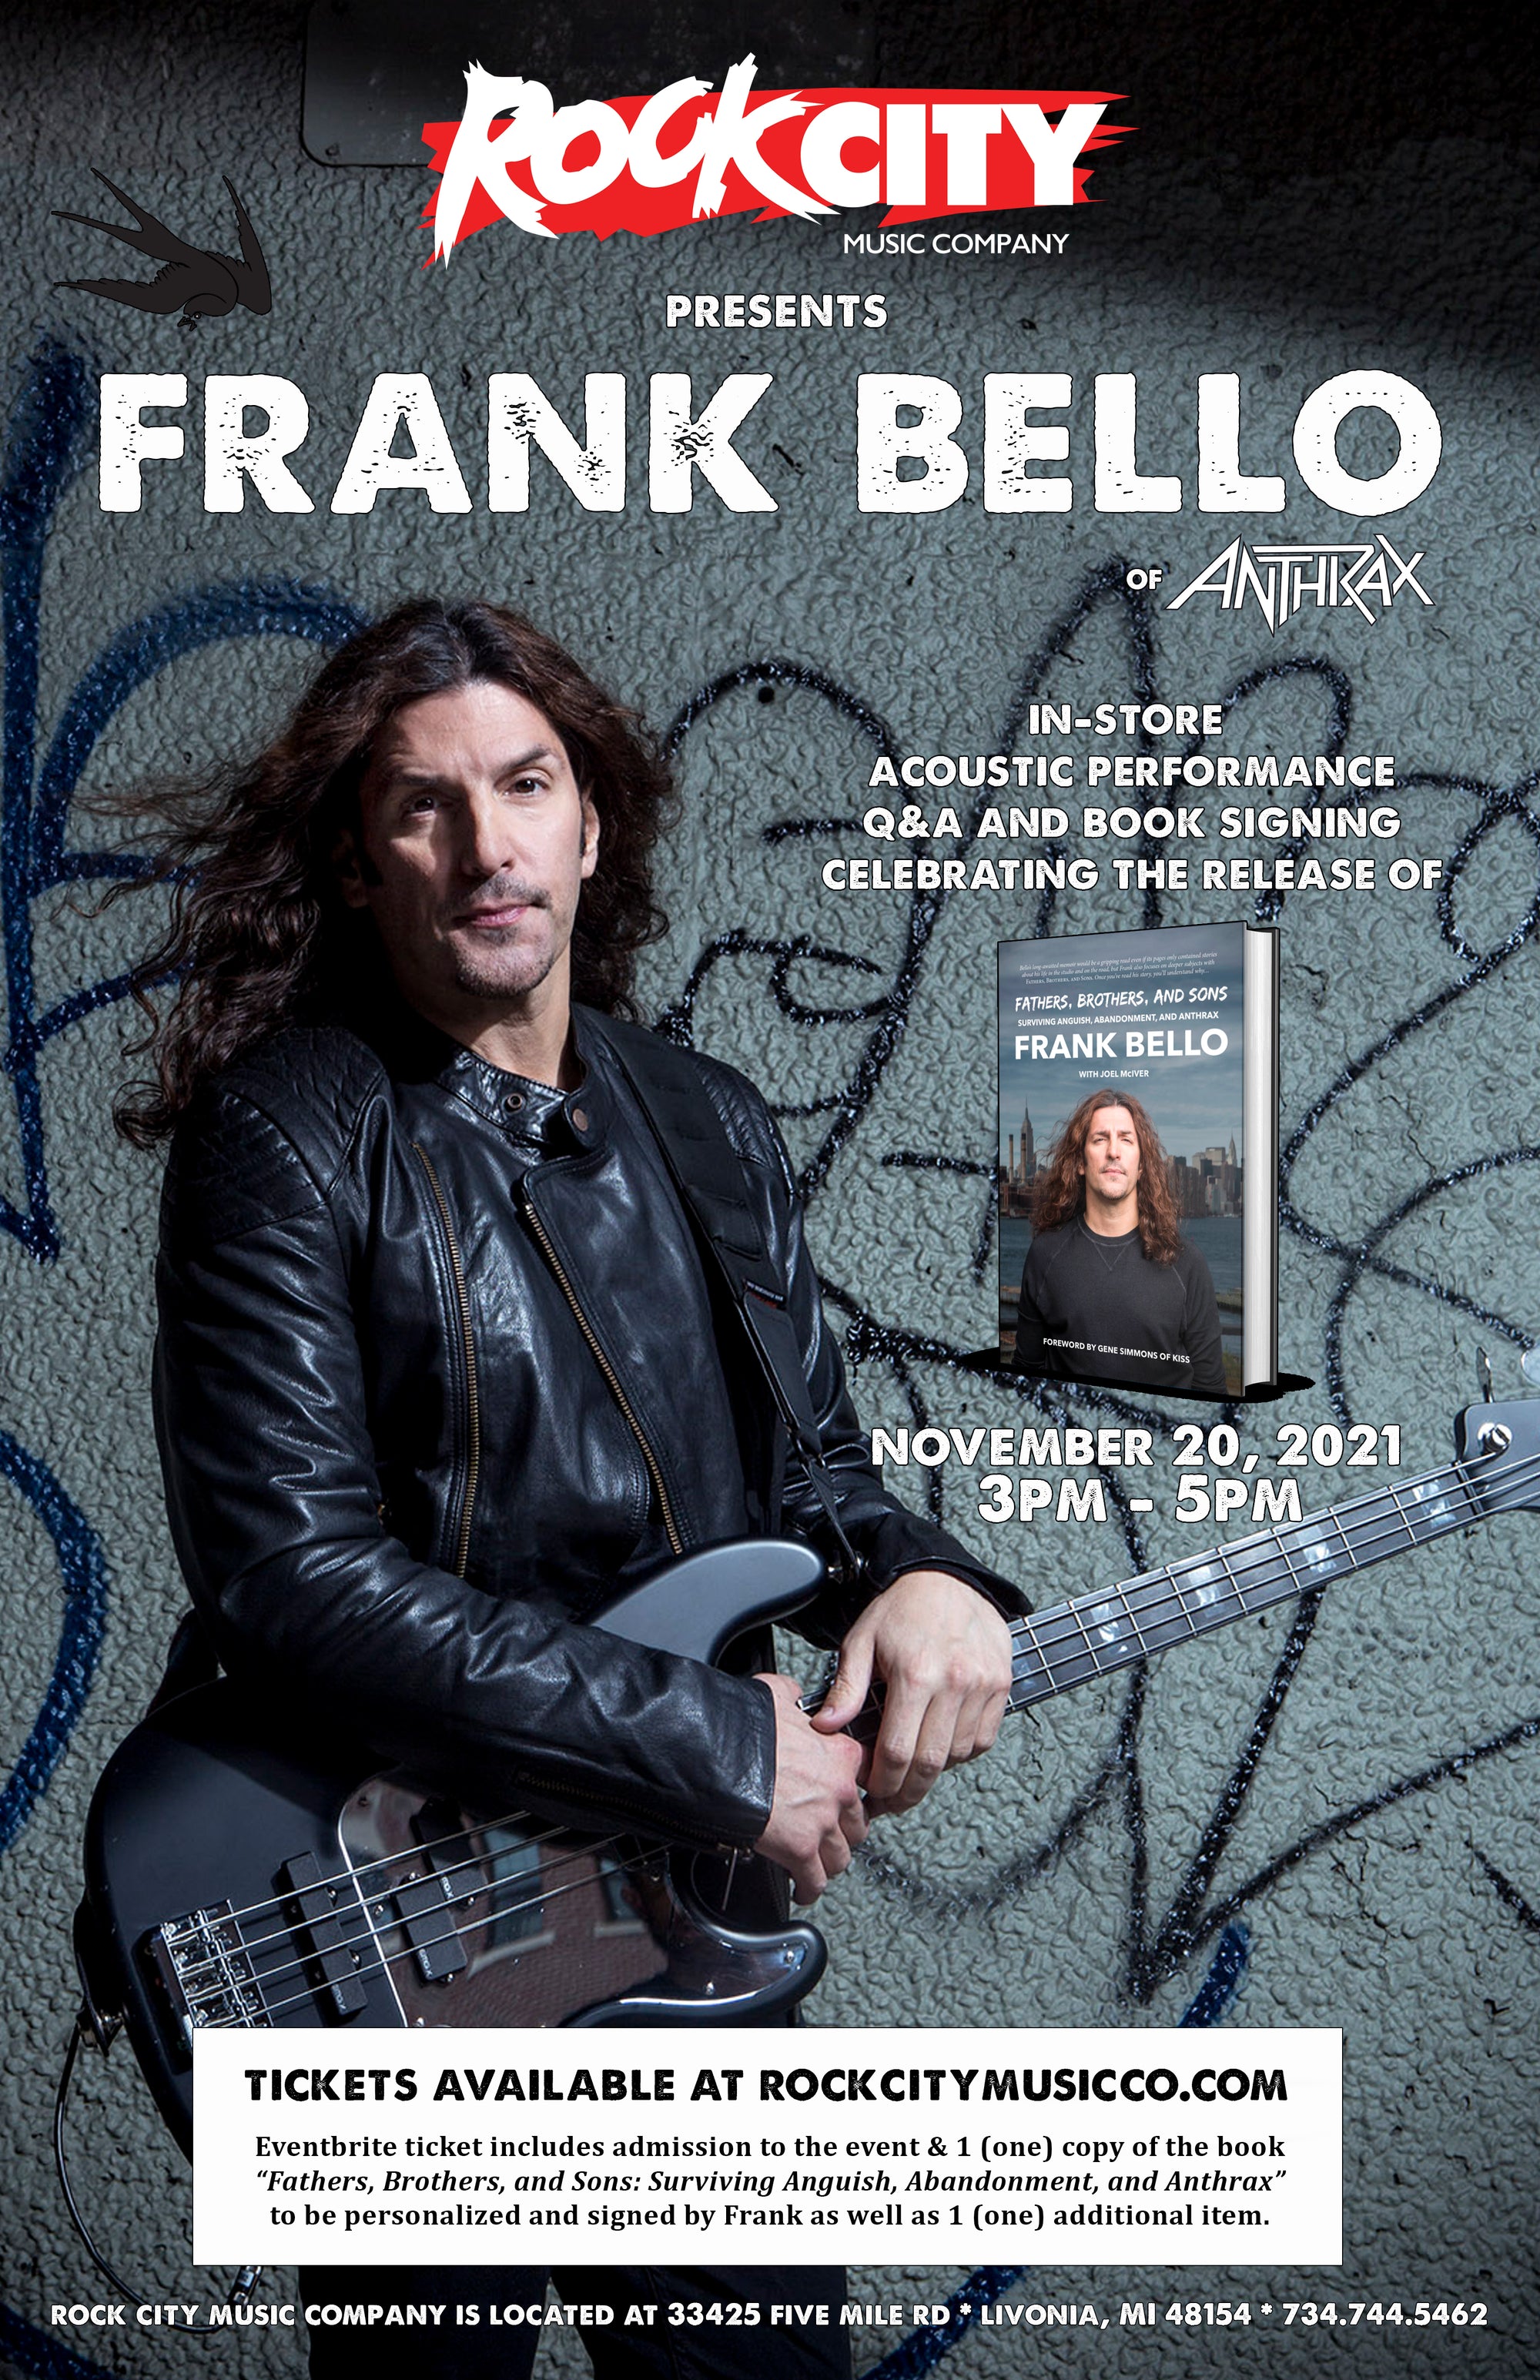 Frank Bello (Anthrax) Celebrates Memoir with In-Store Event at Rock City Music Company 11/20/2021